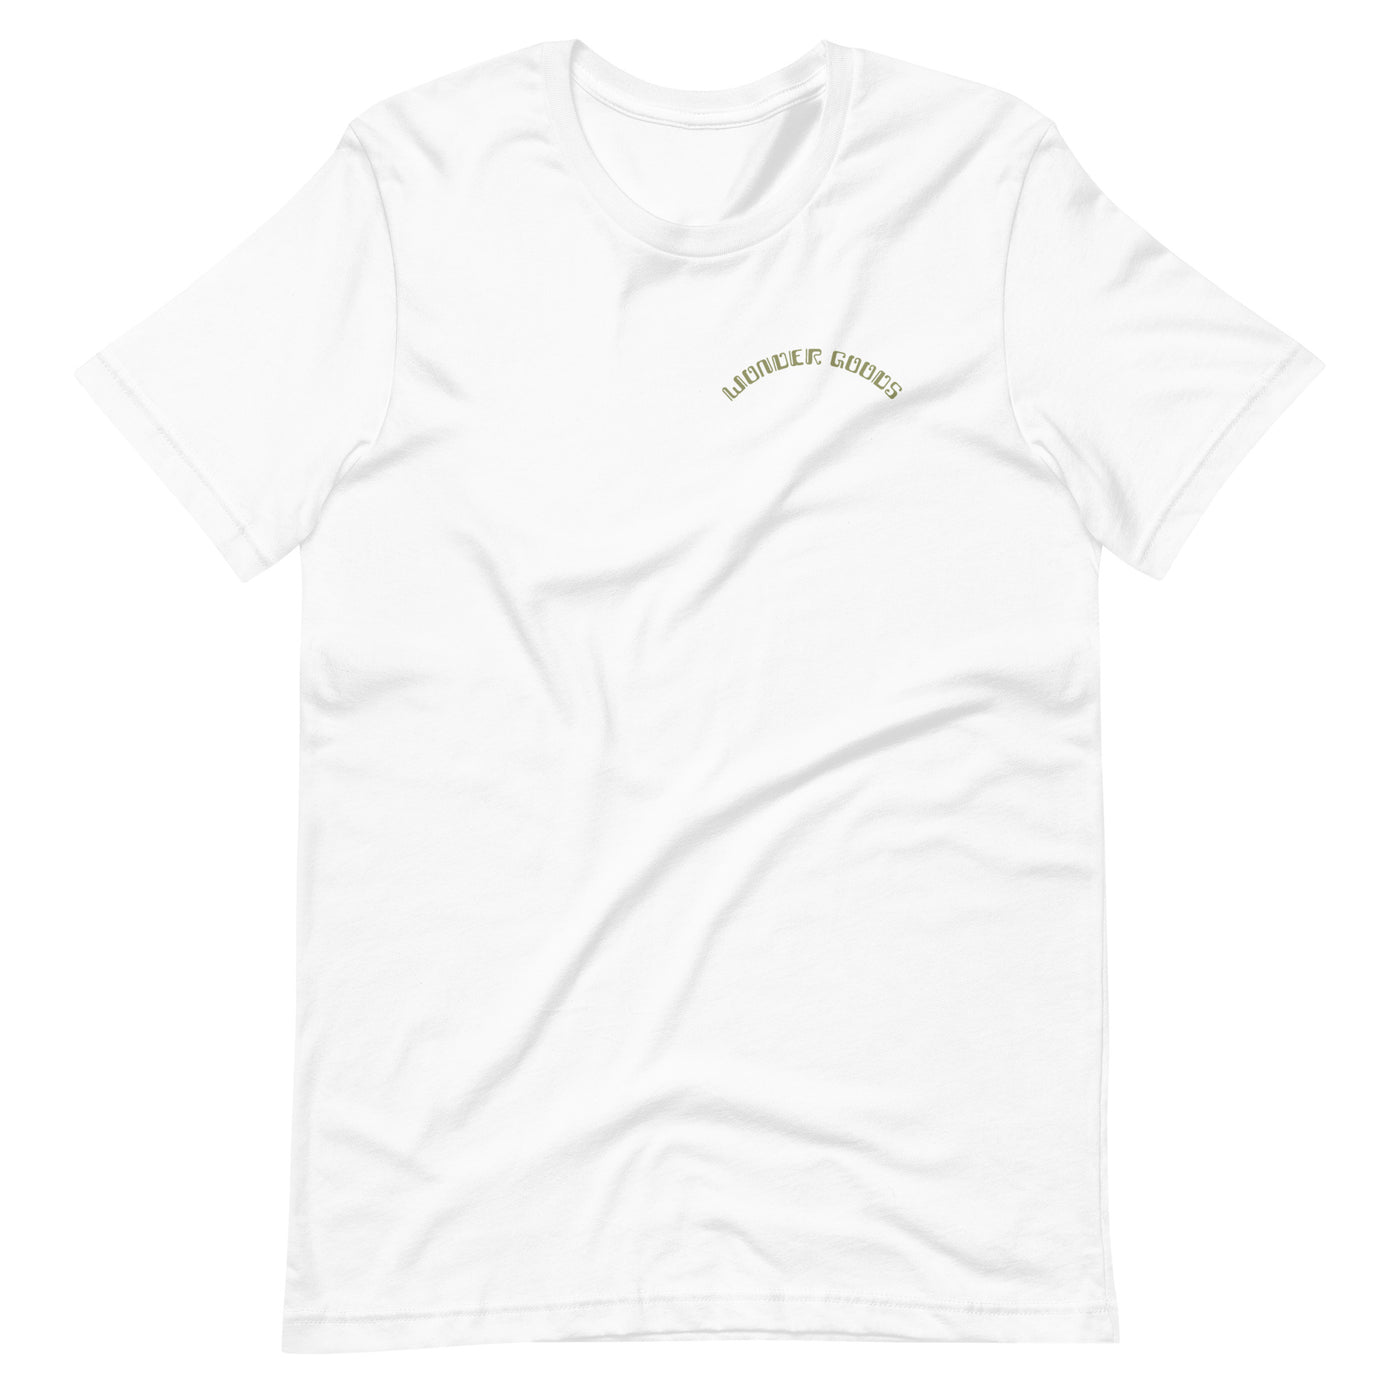 Formless.Forming Story Teller Tee